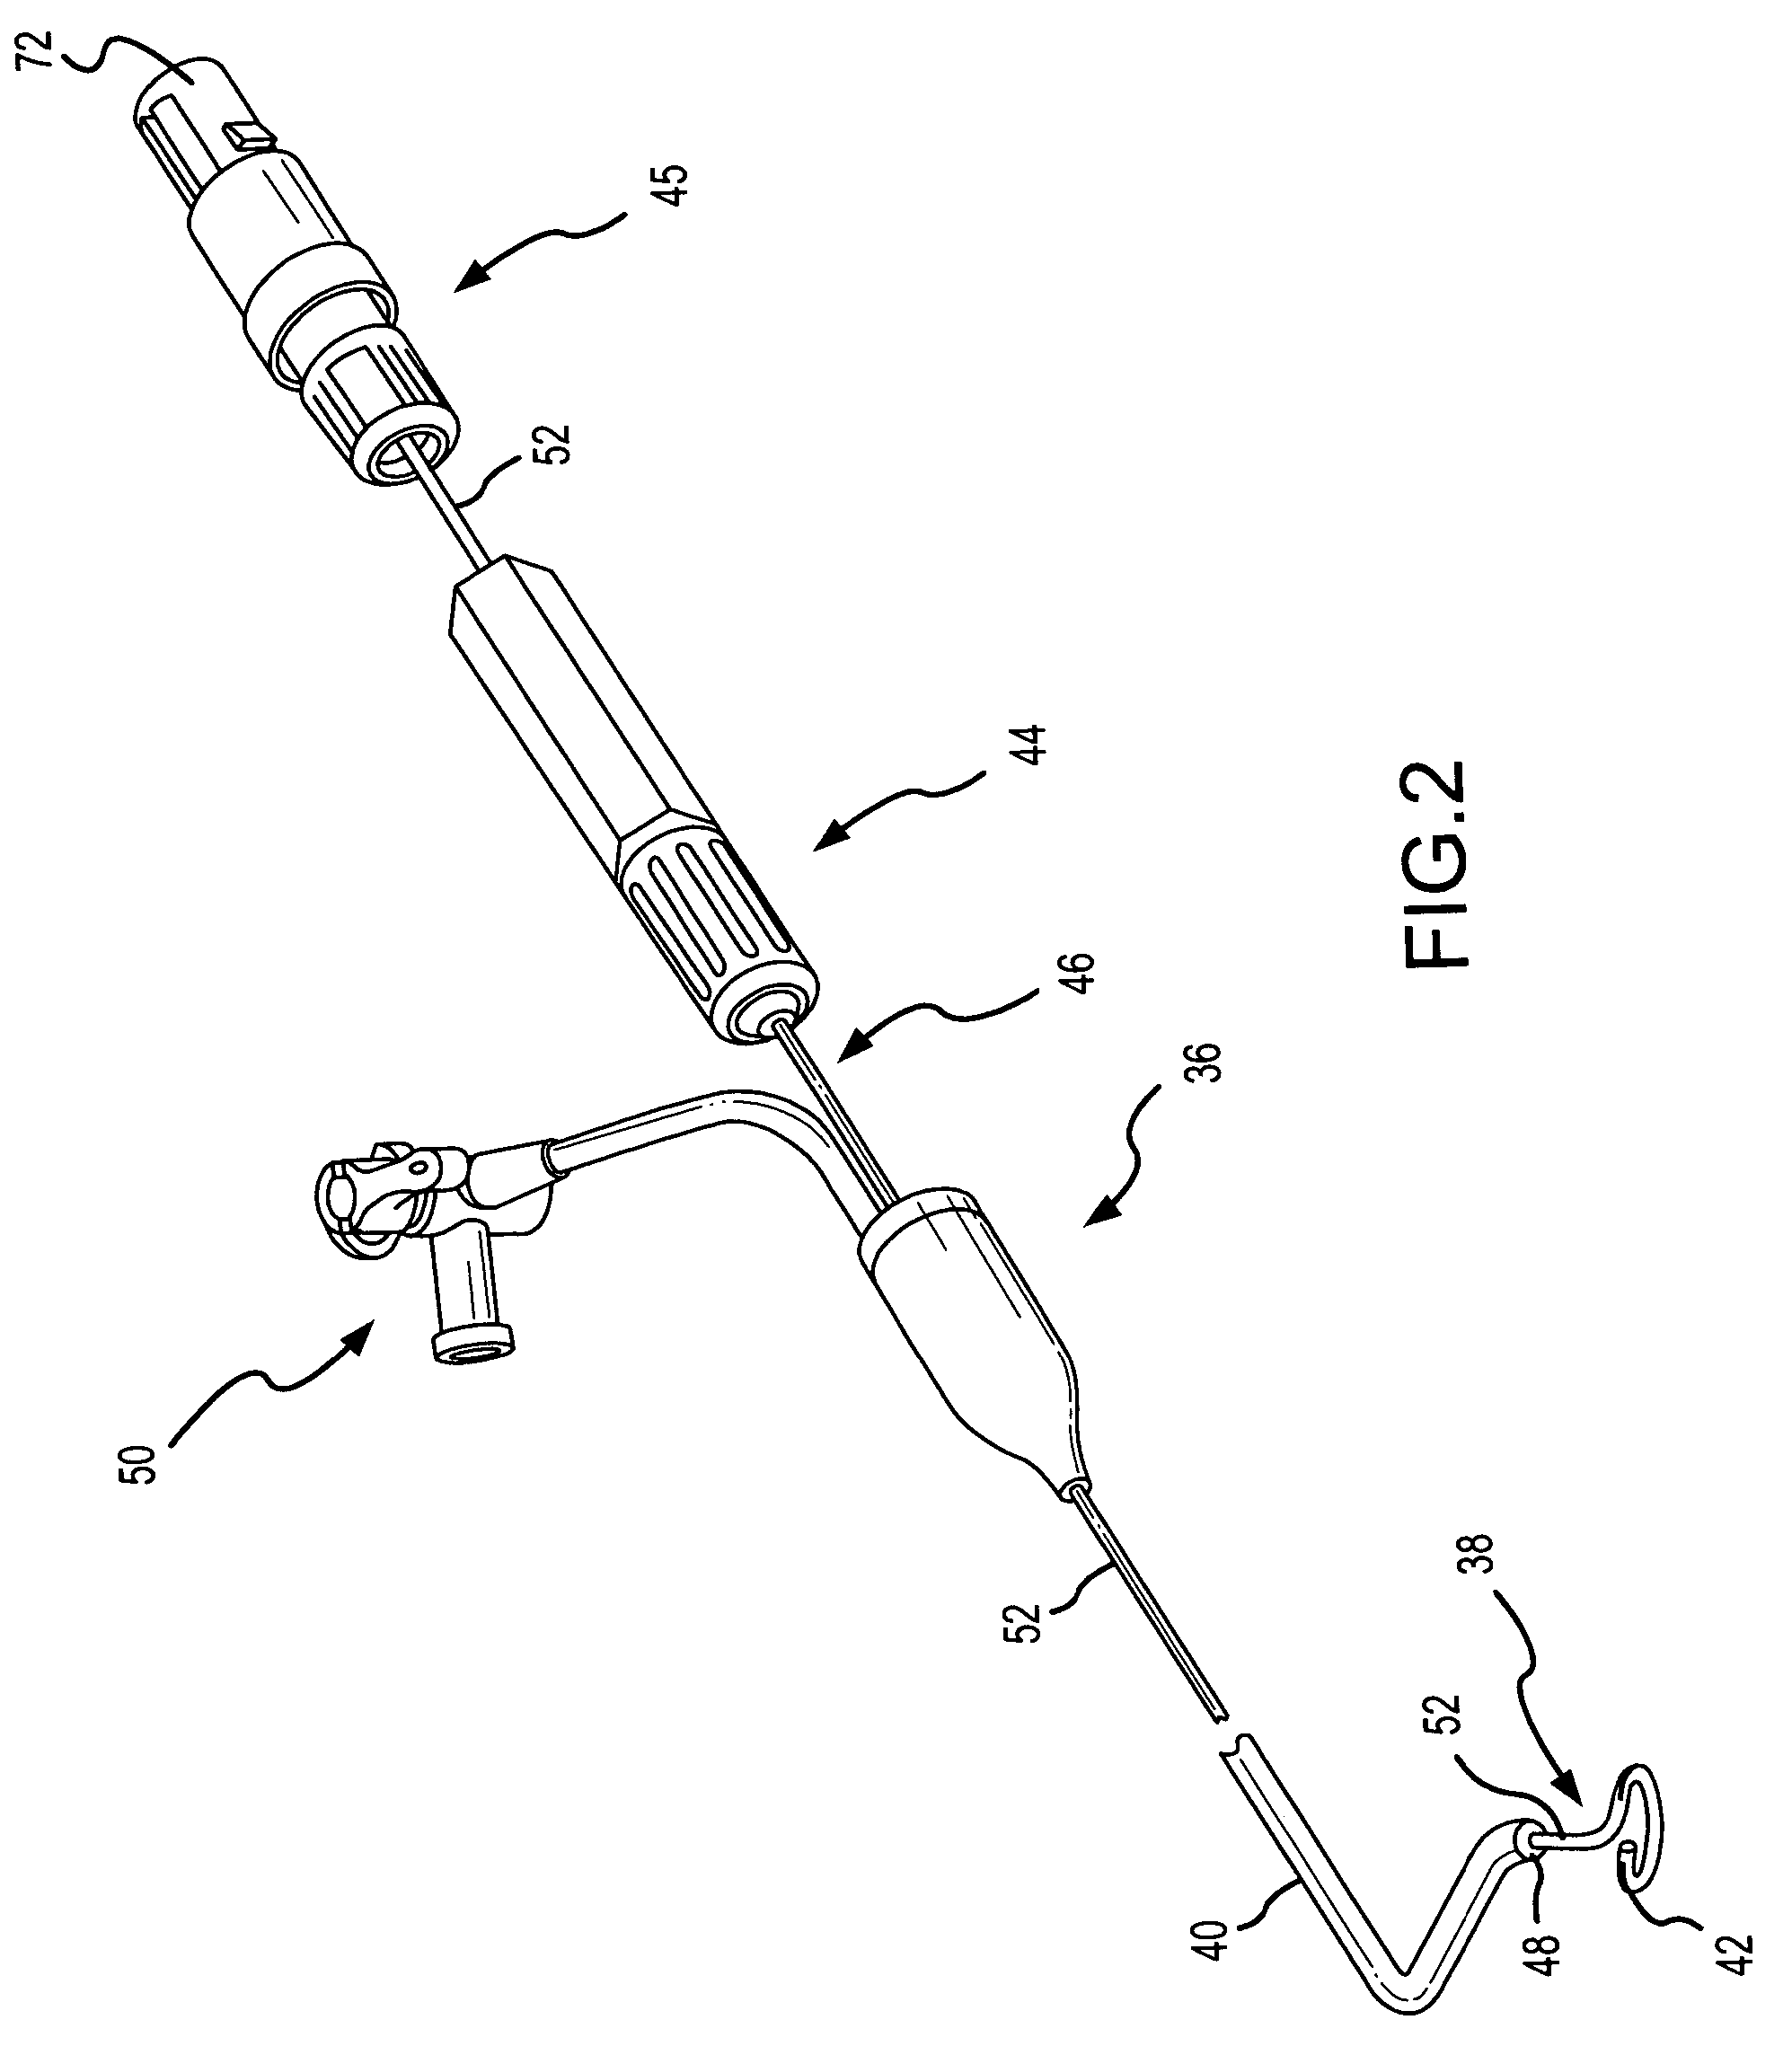 Ablation catheter and electrode